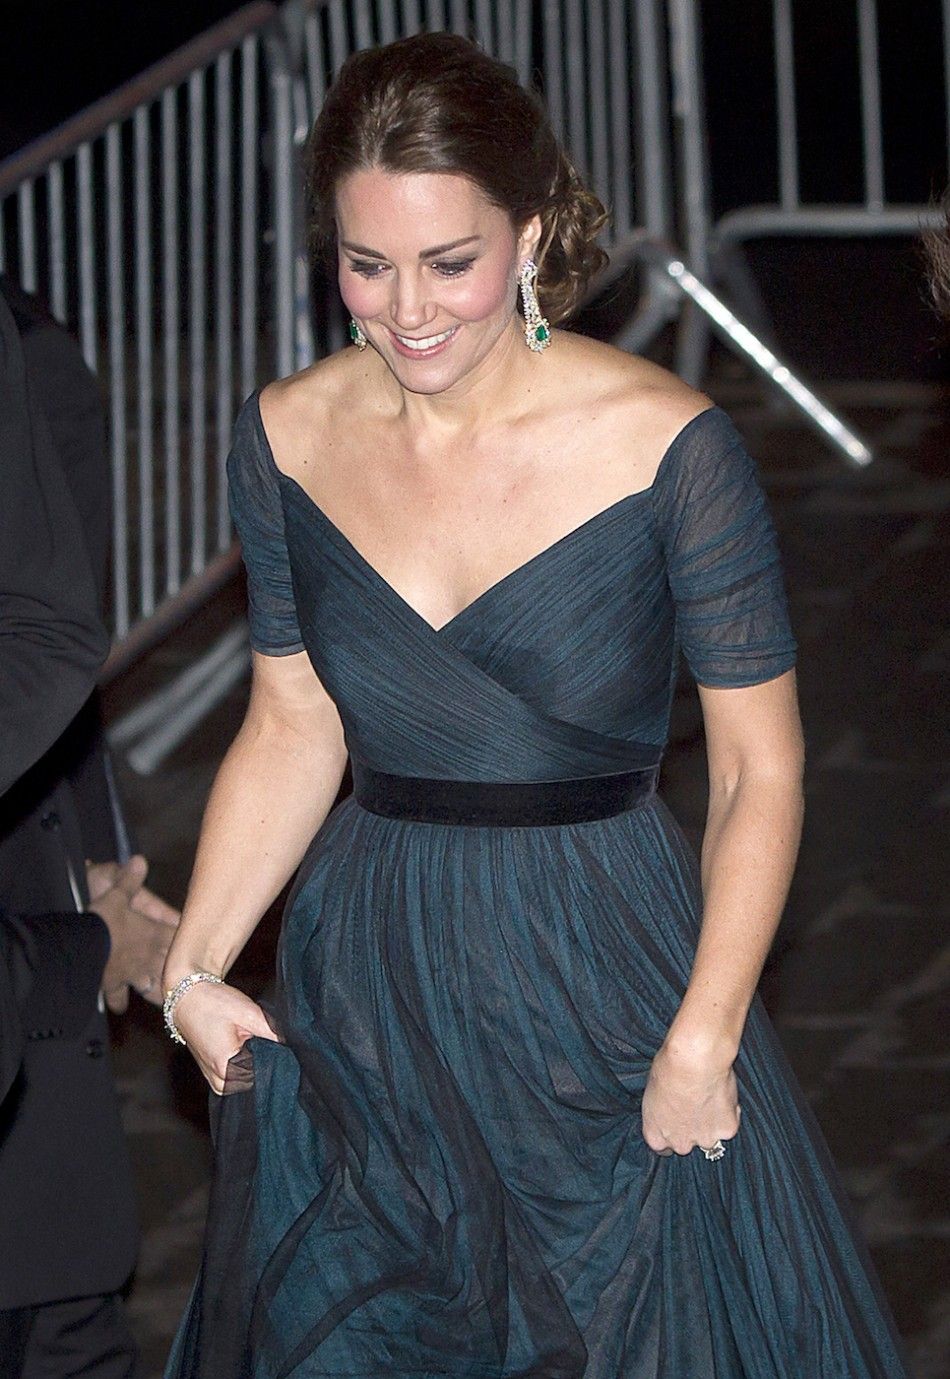 In PHOTO Catherine, Duchess of Cambridge arrives at the Metropolitan Museum of Art to attend the St. Andrews 600th Anniversary Dinner in New York, December 9, 2014.